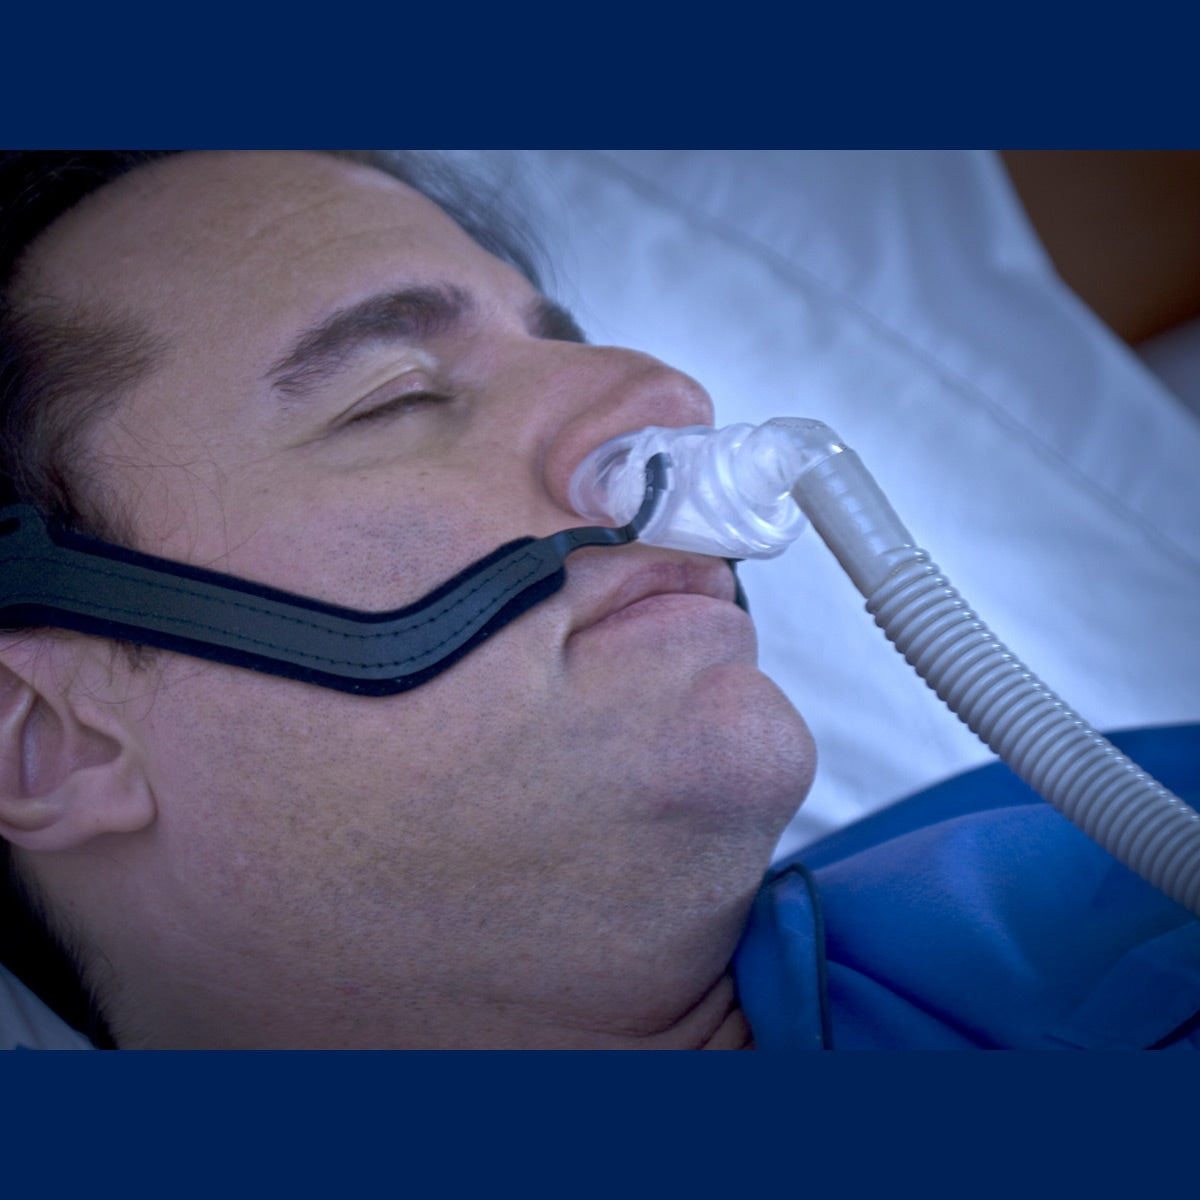 Aloha Nasal Pillow CPAP/BiPAP Mask FitPack with Headgear